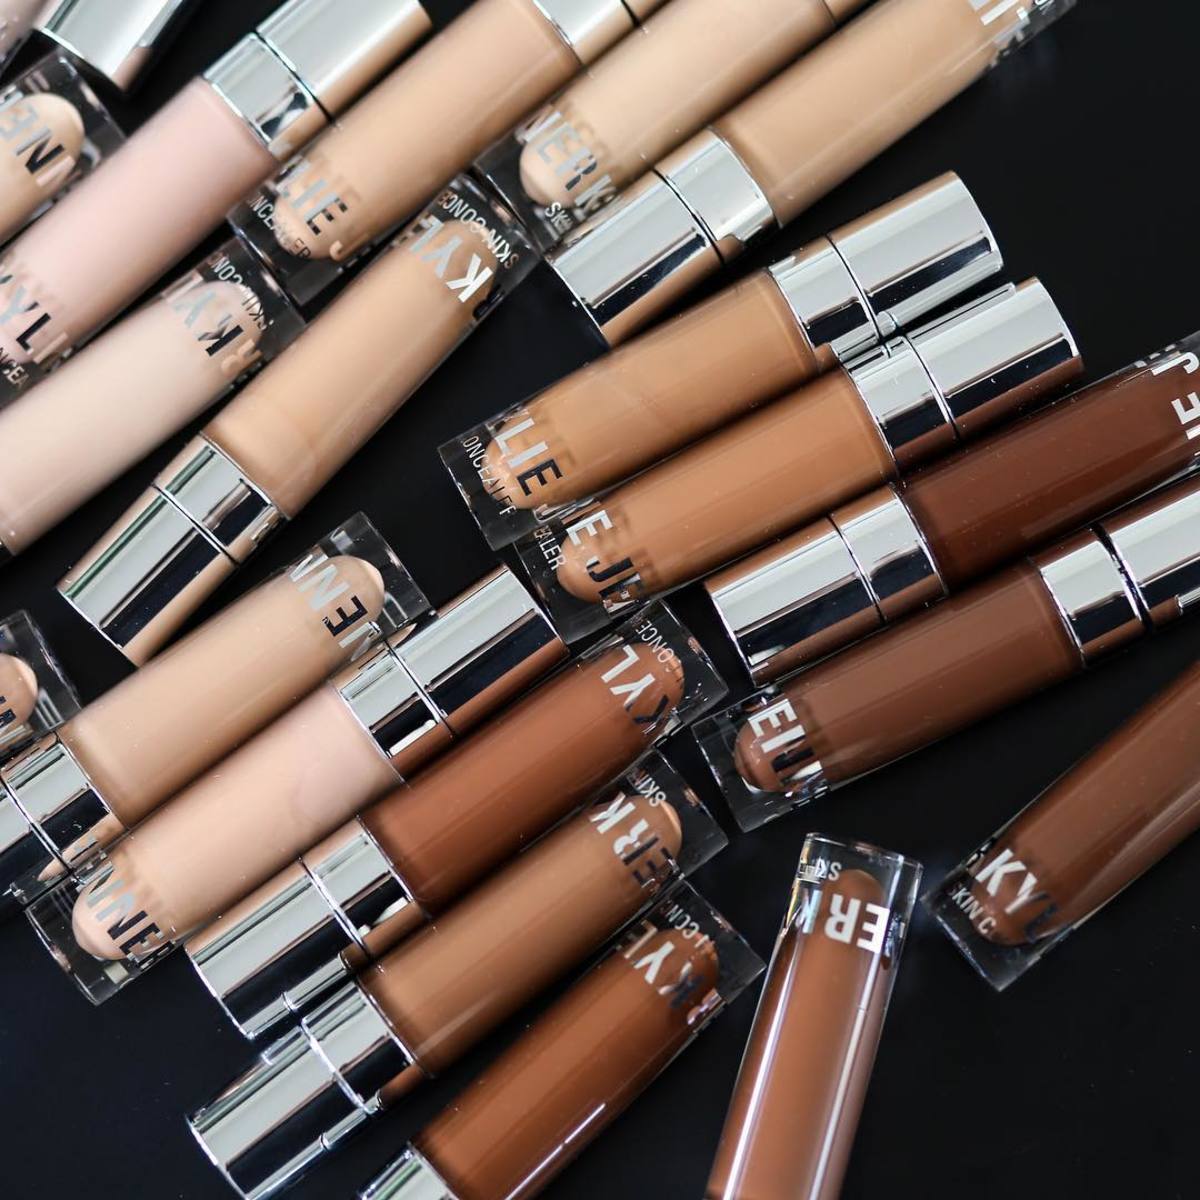 Kylie Cosmetics' forthcoming Skin Concealers. Photo: @kyliecosmetics/Instagram